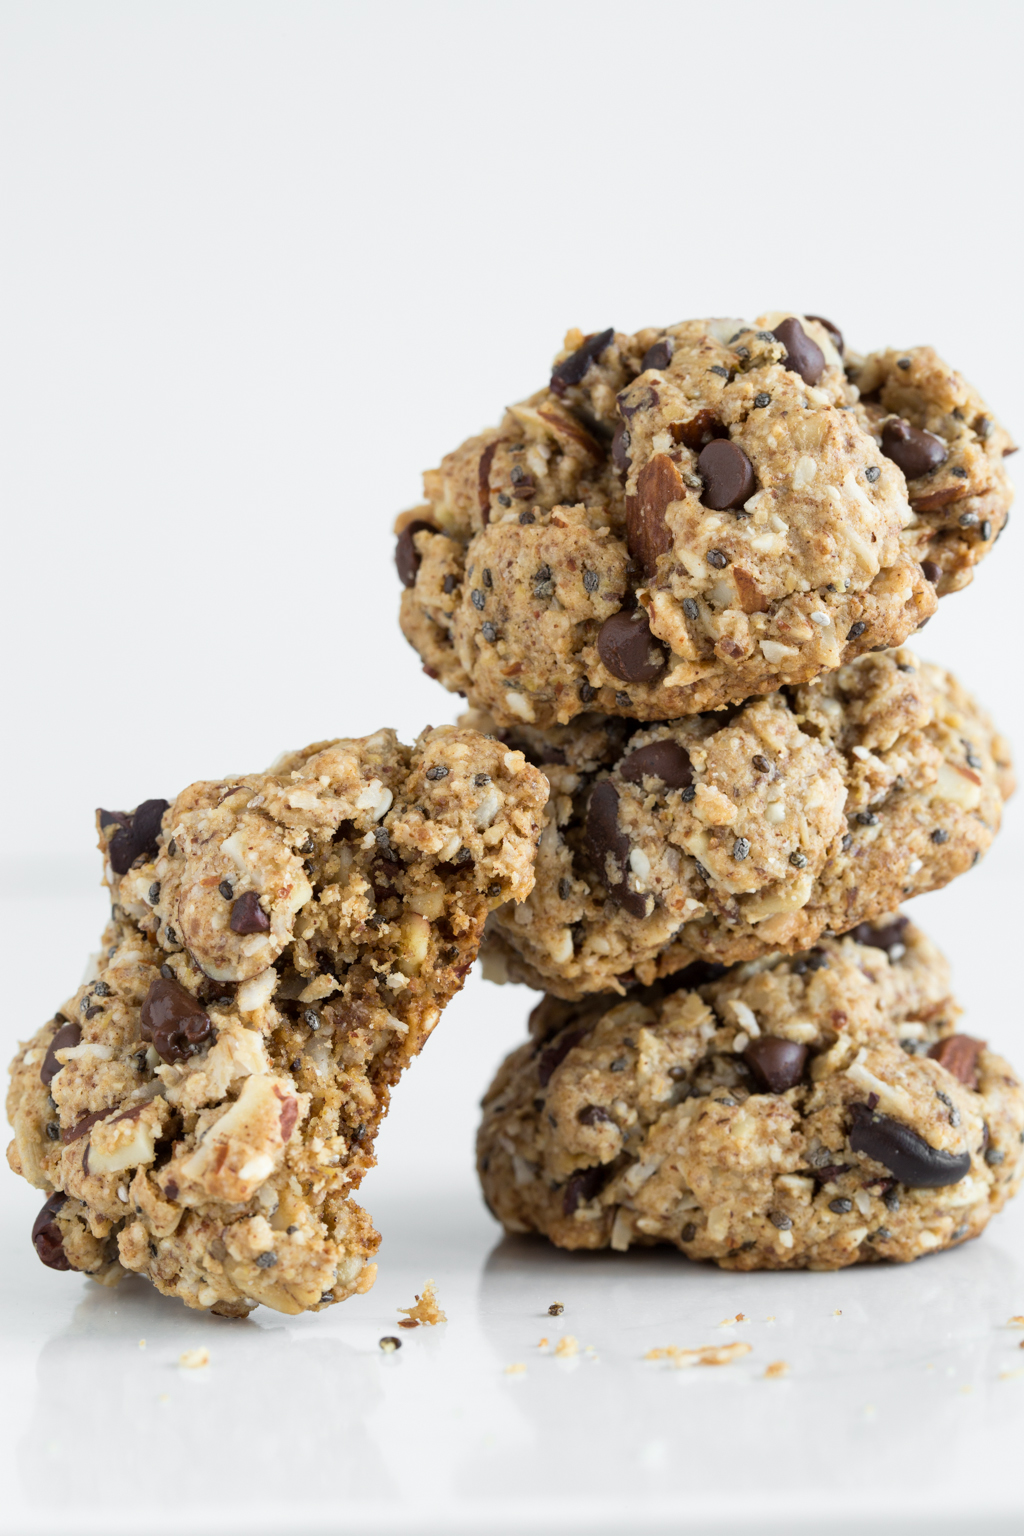 Irresistible Chewy Trail Mix Cookies